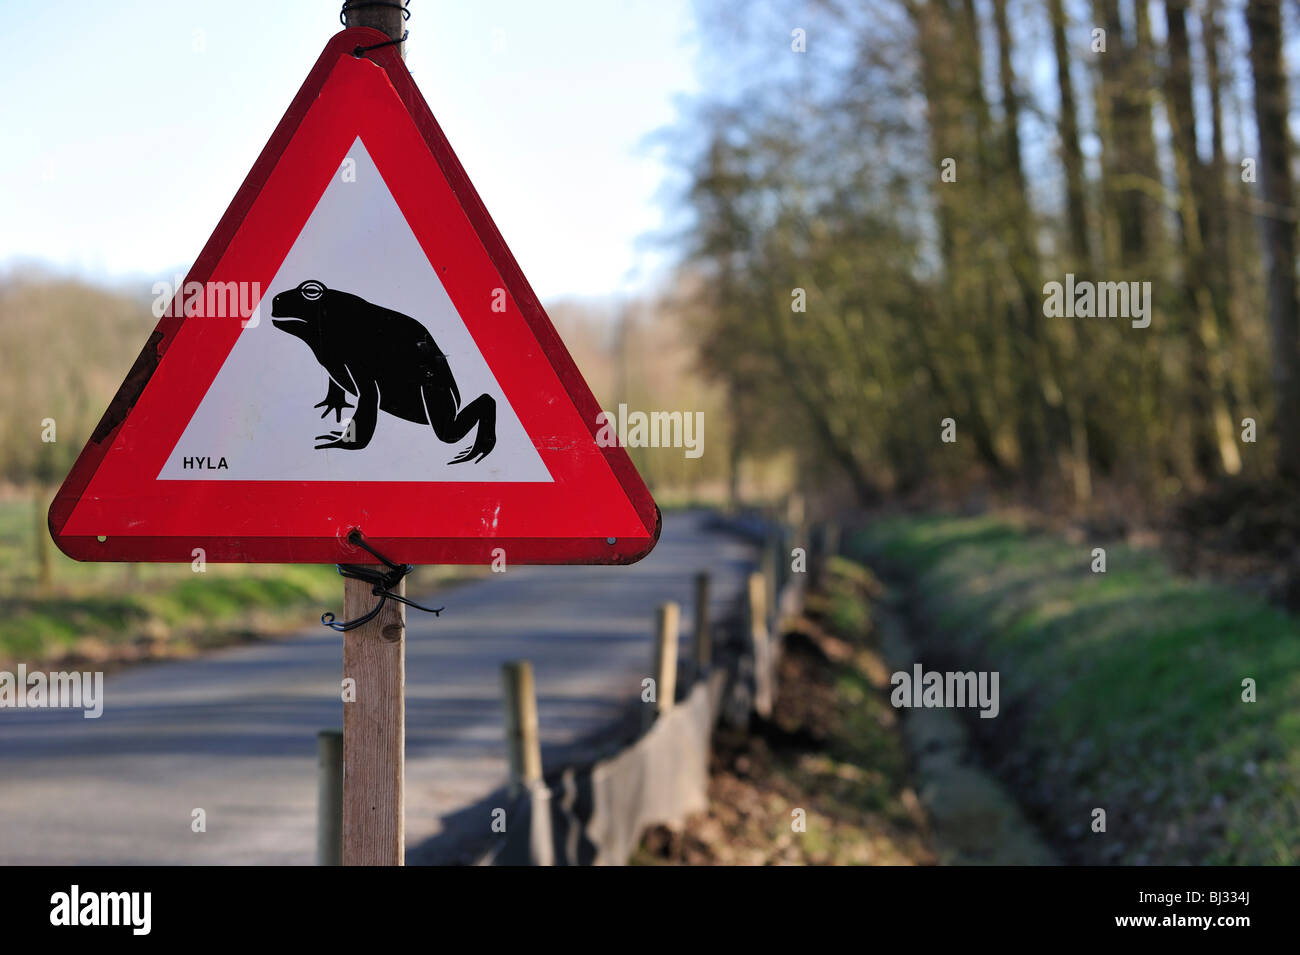 Warning sign for migrating amphibians / toads crossing the road during annual migration in the spring, Belgium Stock Photo